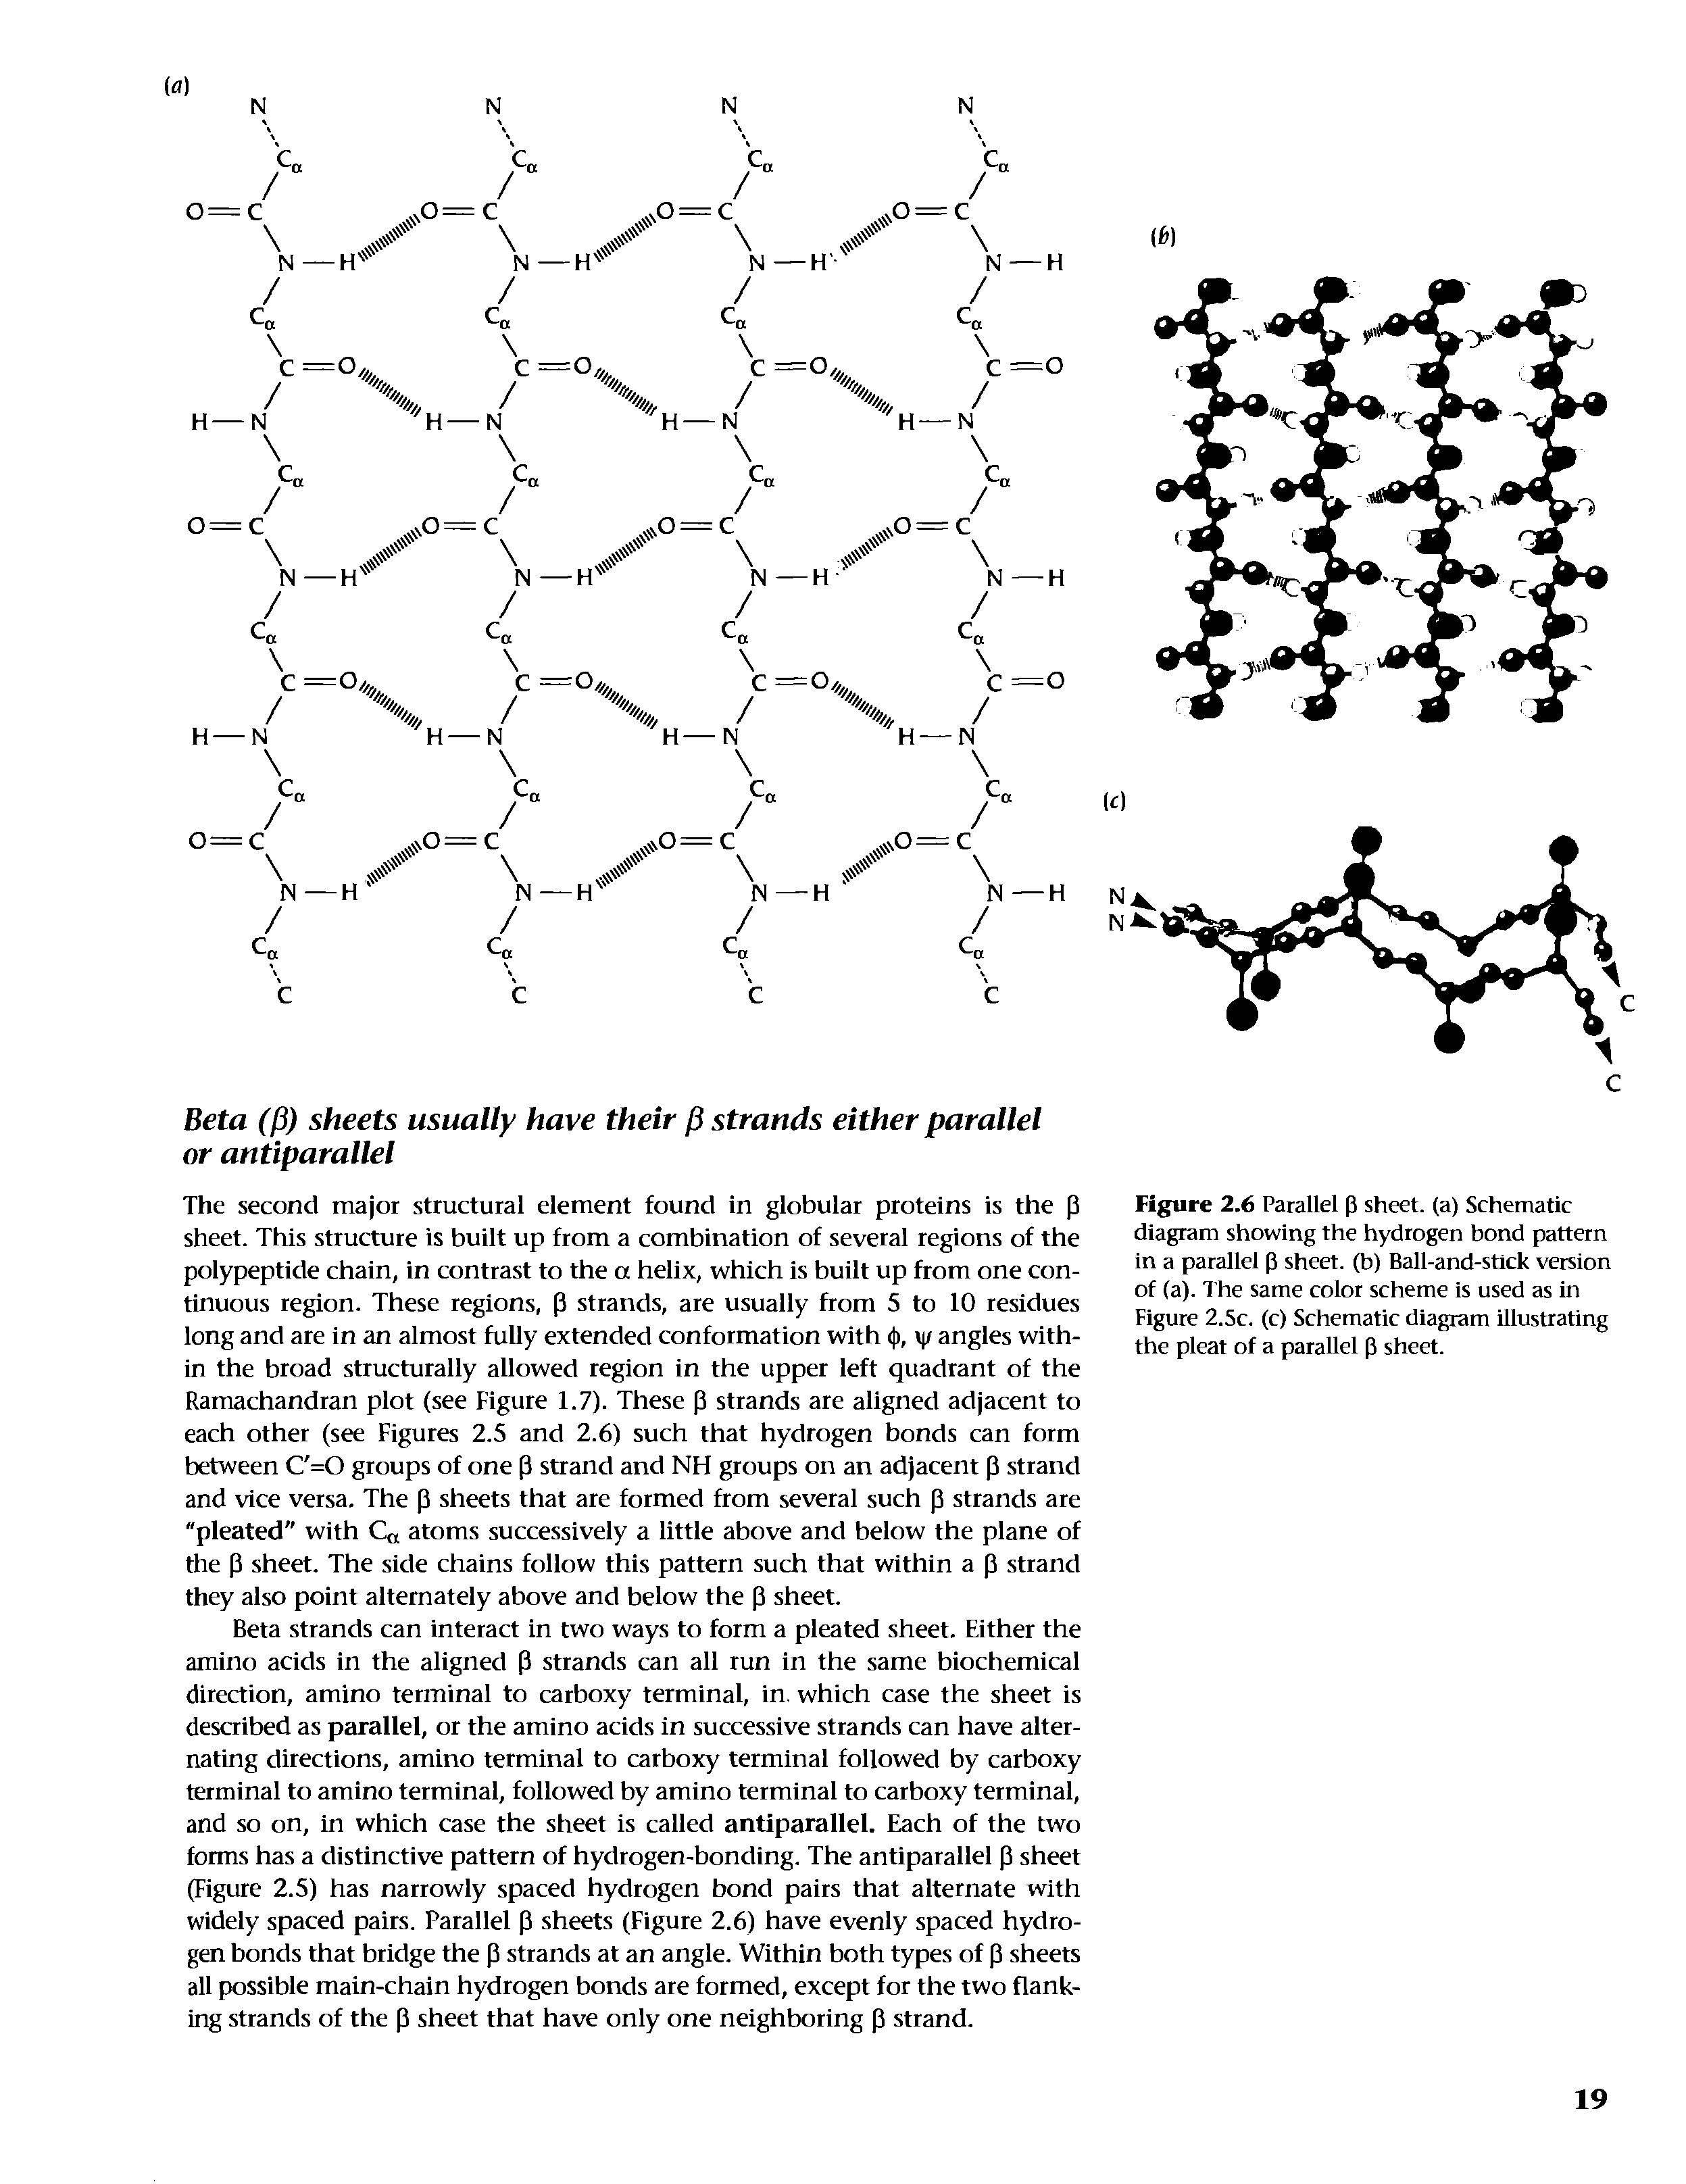 Figure 2.6 Parallel p sheet, (a) Schematic diagram showing the hydrogen bond pattern in a parallel p sheet, (b) Ball-and-stlck version of (a). The same color scheme is used as in Figure 2.5c. (c) Schematic diagram illustrating the pleat of a parallel p sheet.